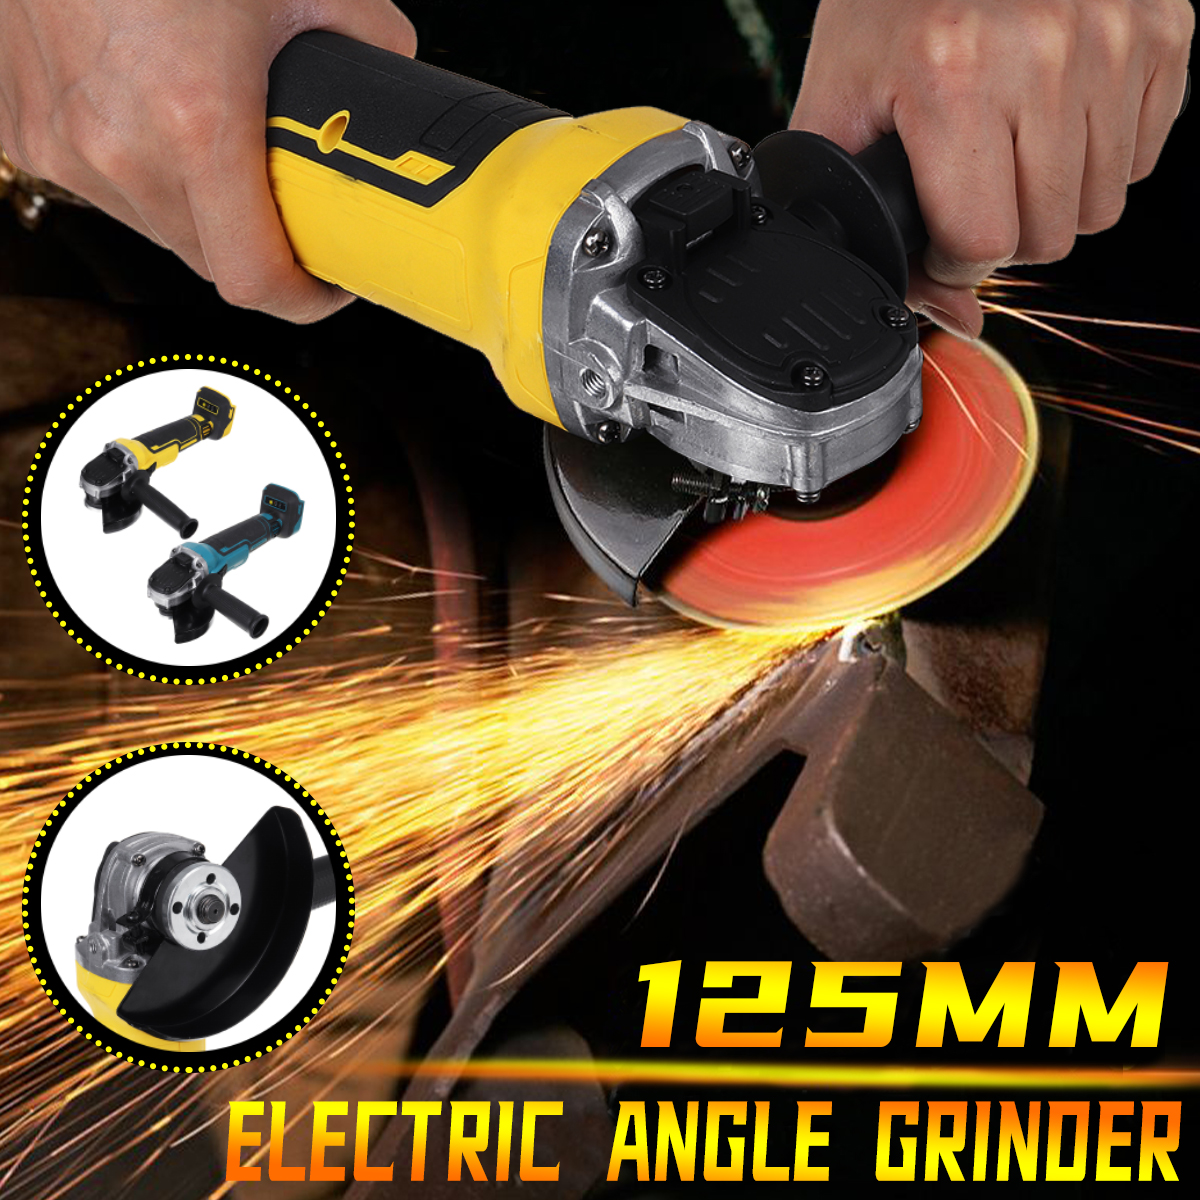 Drillpro-Electric-Brushless-Cordless-Angle-Grinder-M10-125mm-Cut-for-Makiita-18V-Battery-1791879-1